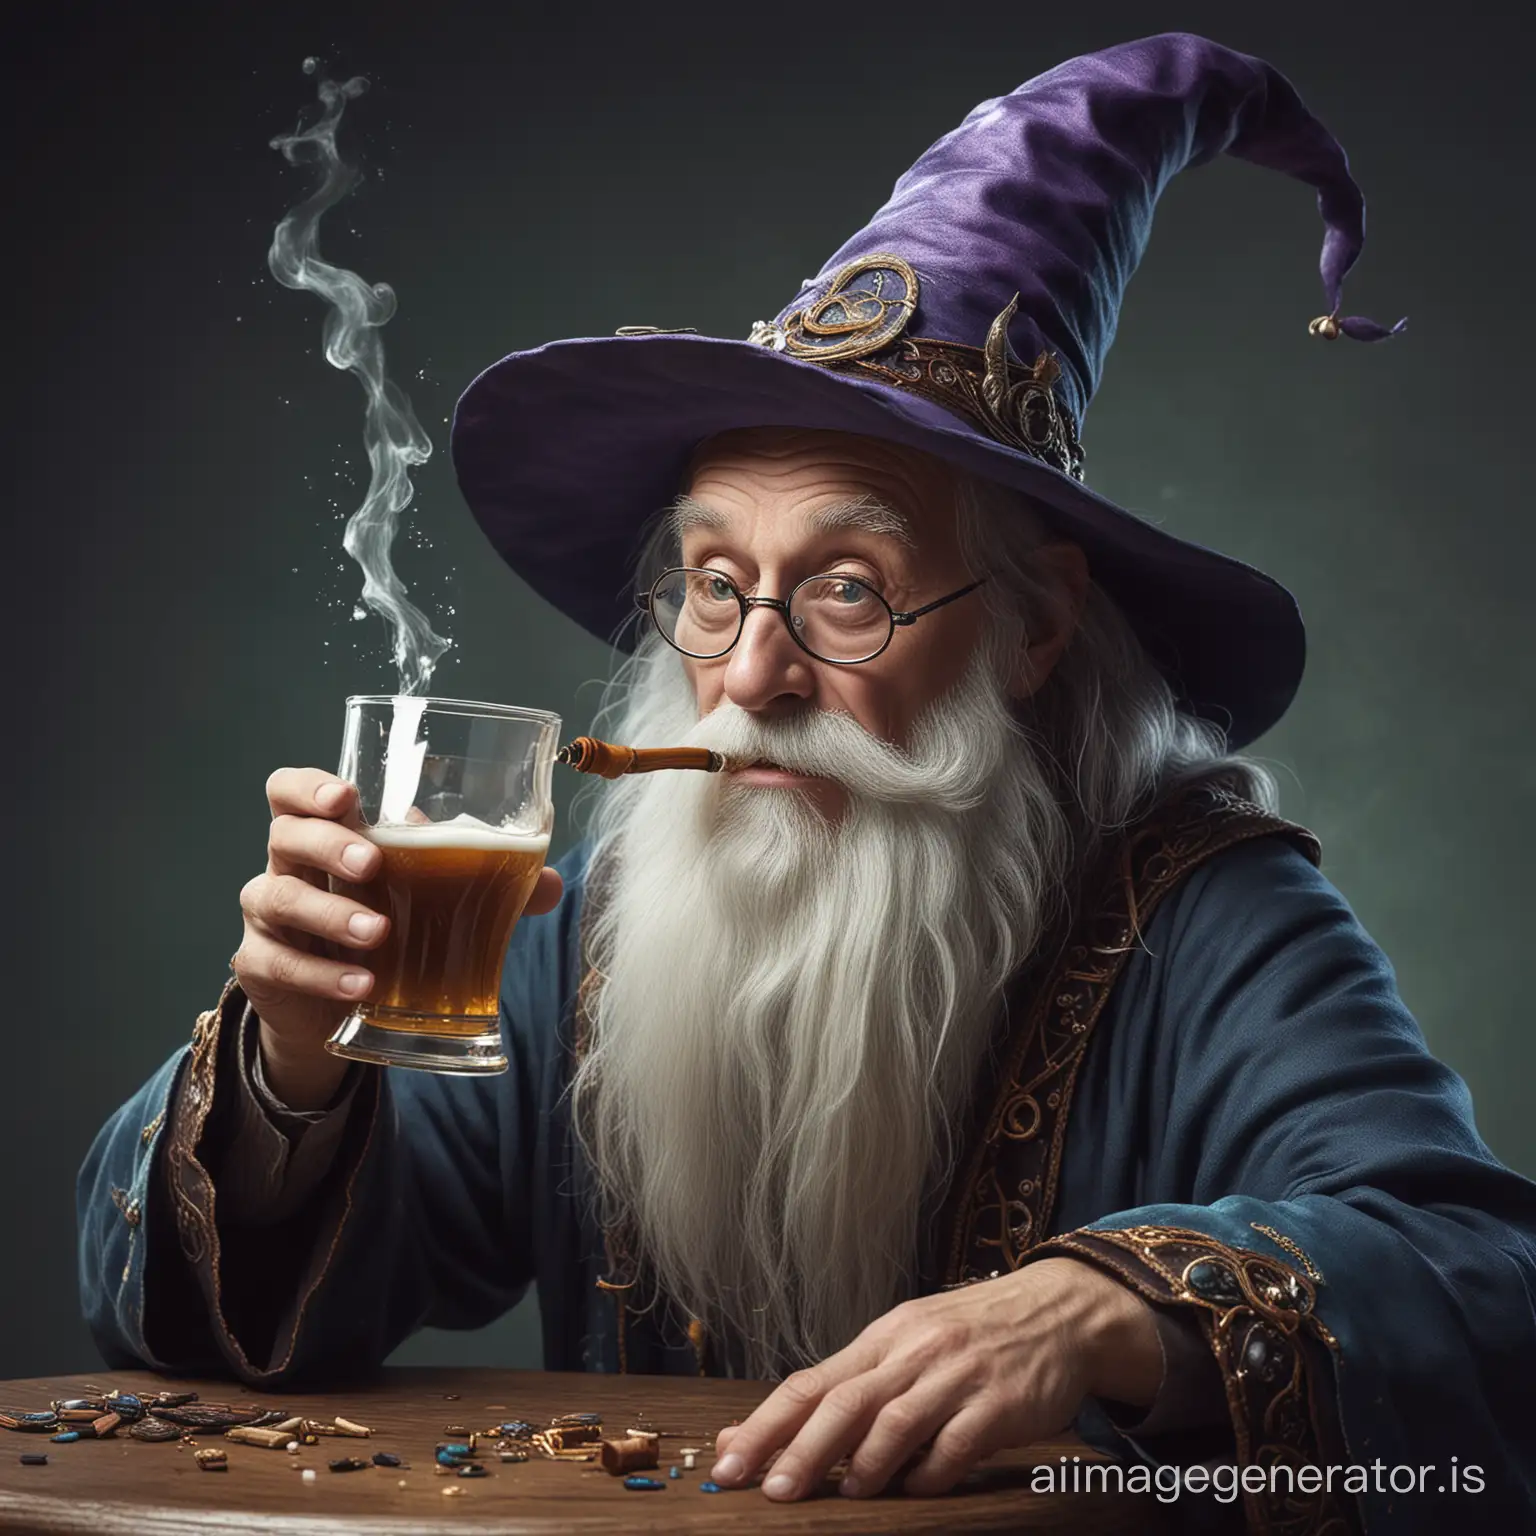 generate an image of a whimsical wizard drinking weird